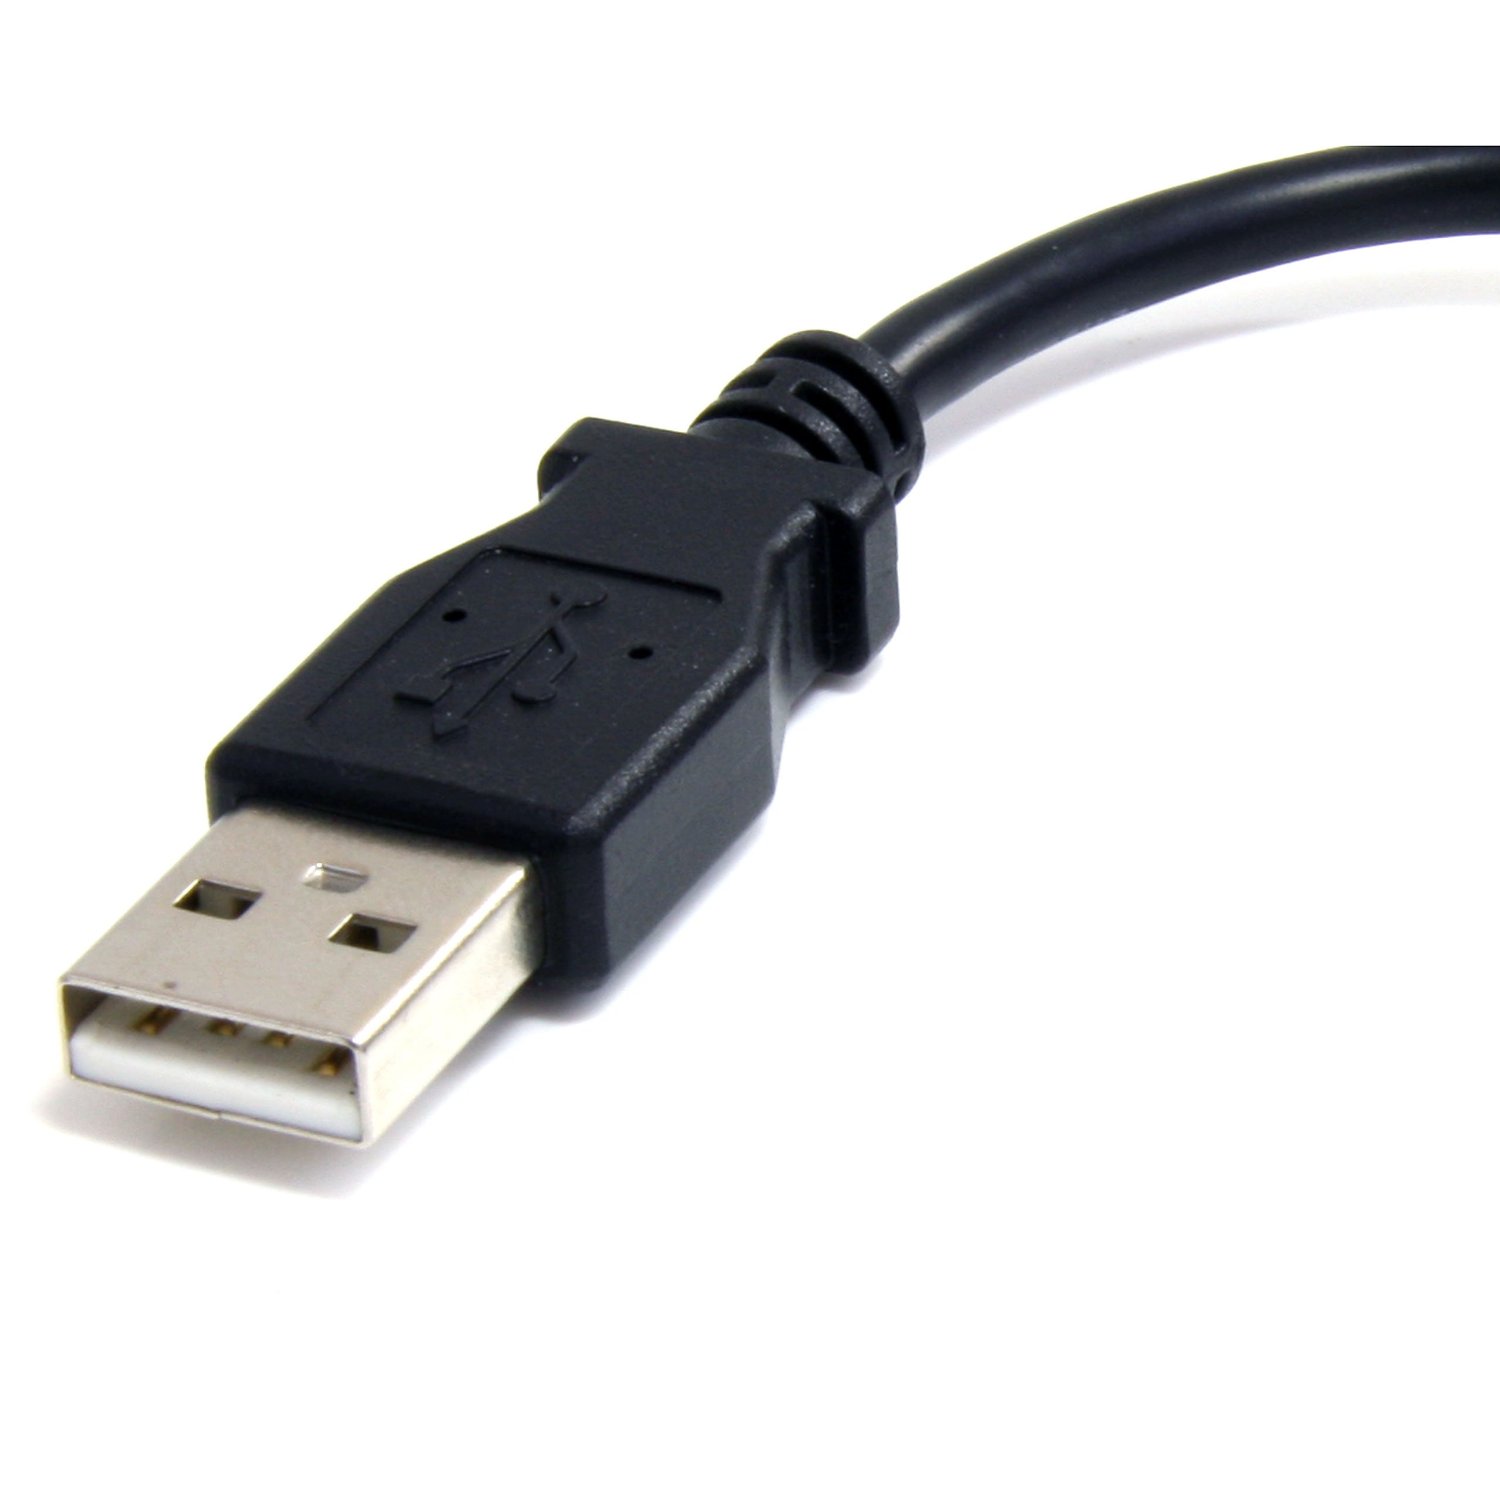 StarTech.com 6in USB Cable - A Micro B - USB to Micro B - USB 2.0 A Male to USB 2.0 Micro-B Male - 6-inches - Black (UUSBHAUB6IN) - USB